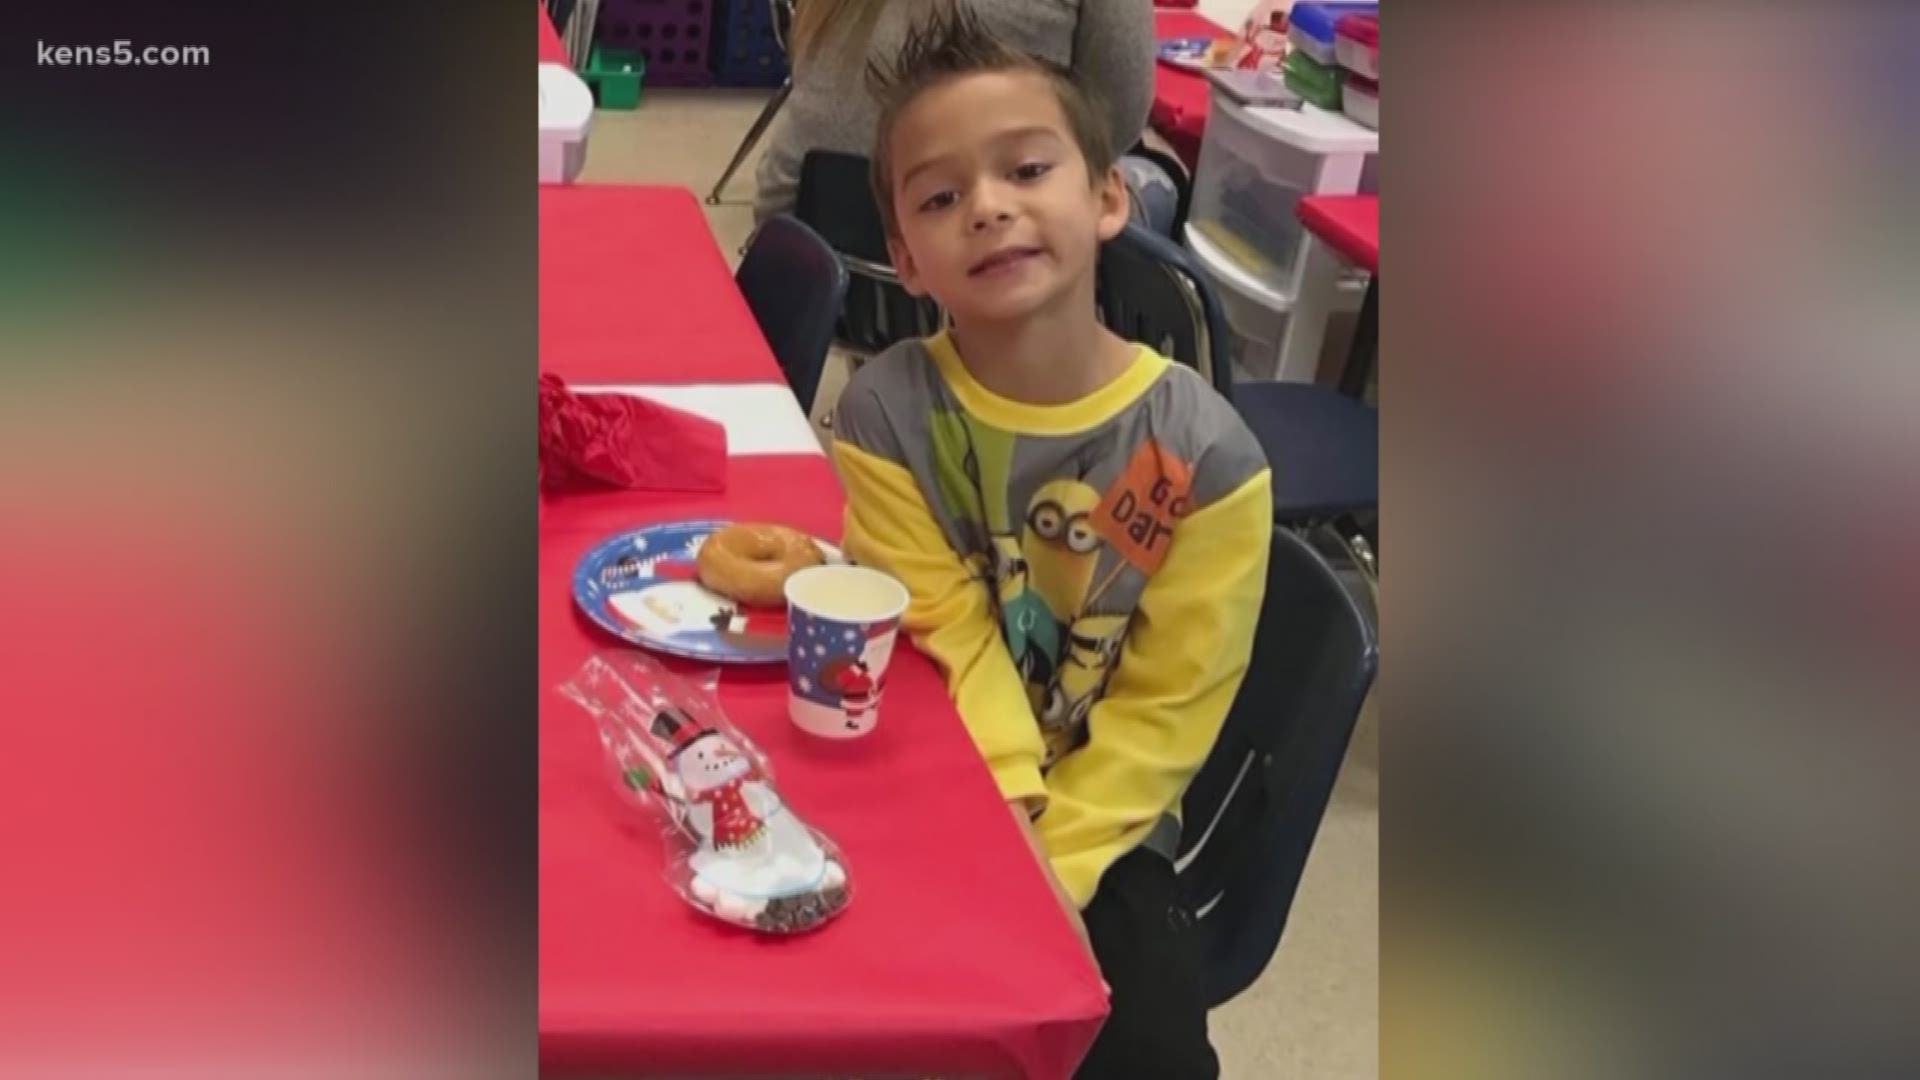 Bexar County Sheriff Salazar said Friday a "tragic accident" led to the death of a 6-year-old Schertz boy as deputies pursued a suspect they believed was armed in front of his home.